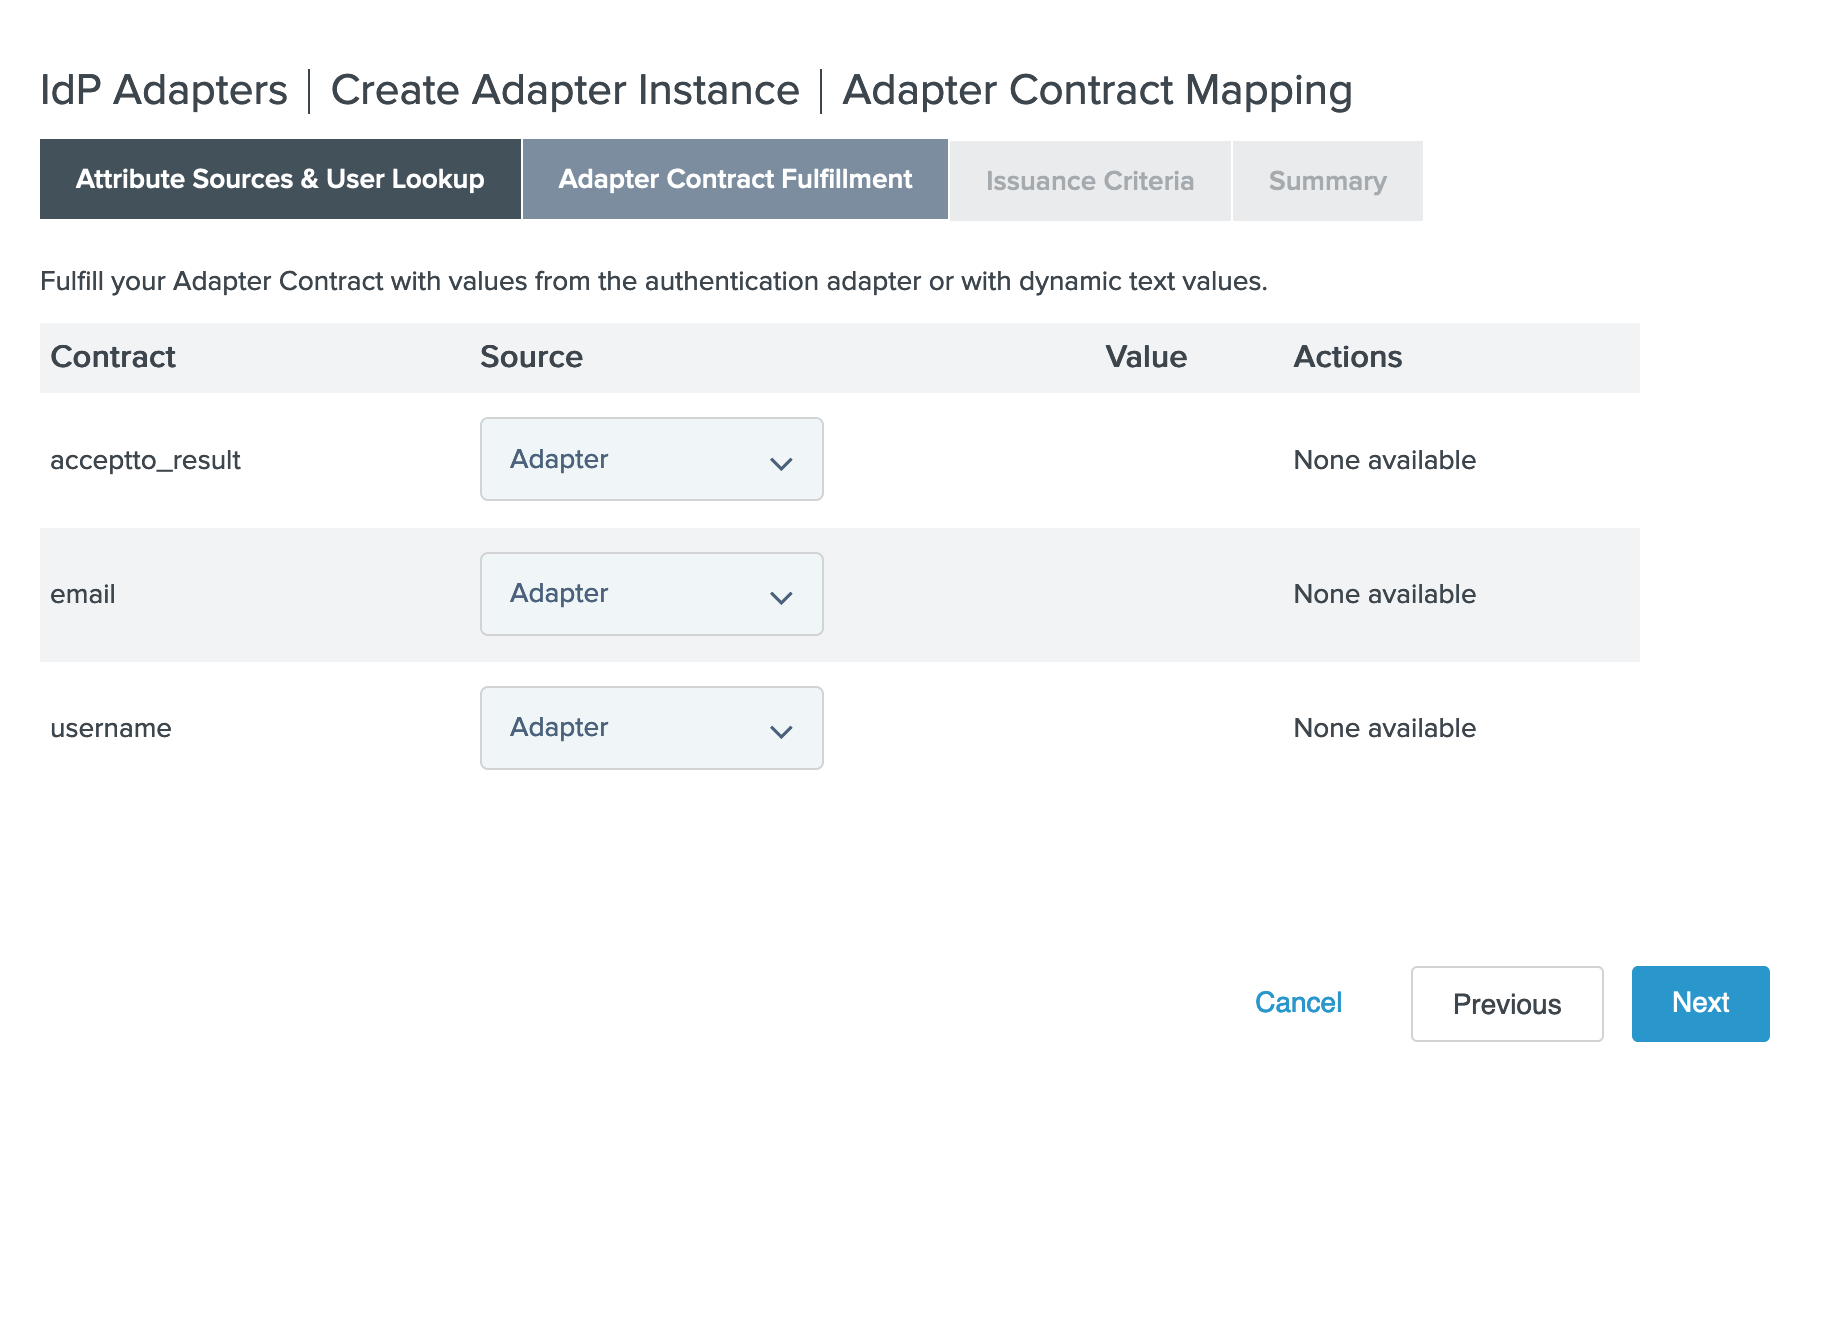 IdP Adapters | Create Adapter Instance | Adapter Contract Mapping - Adapter Contract Fulfillment